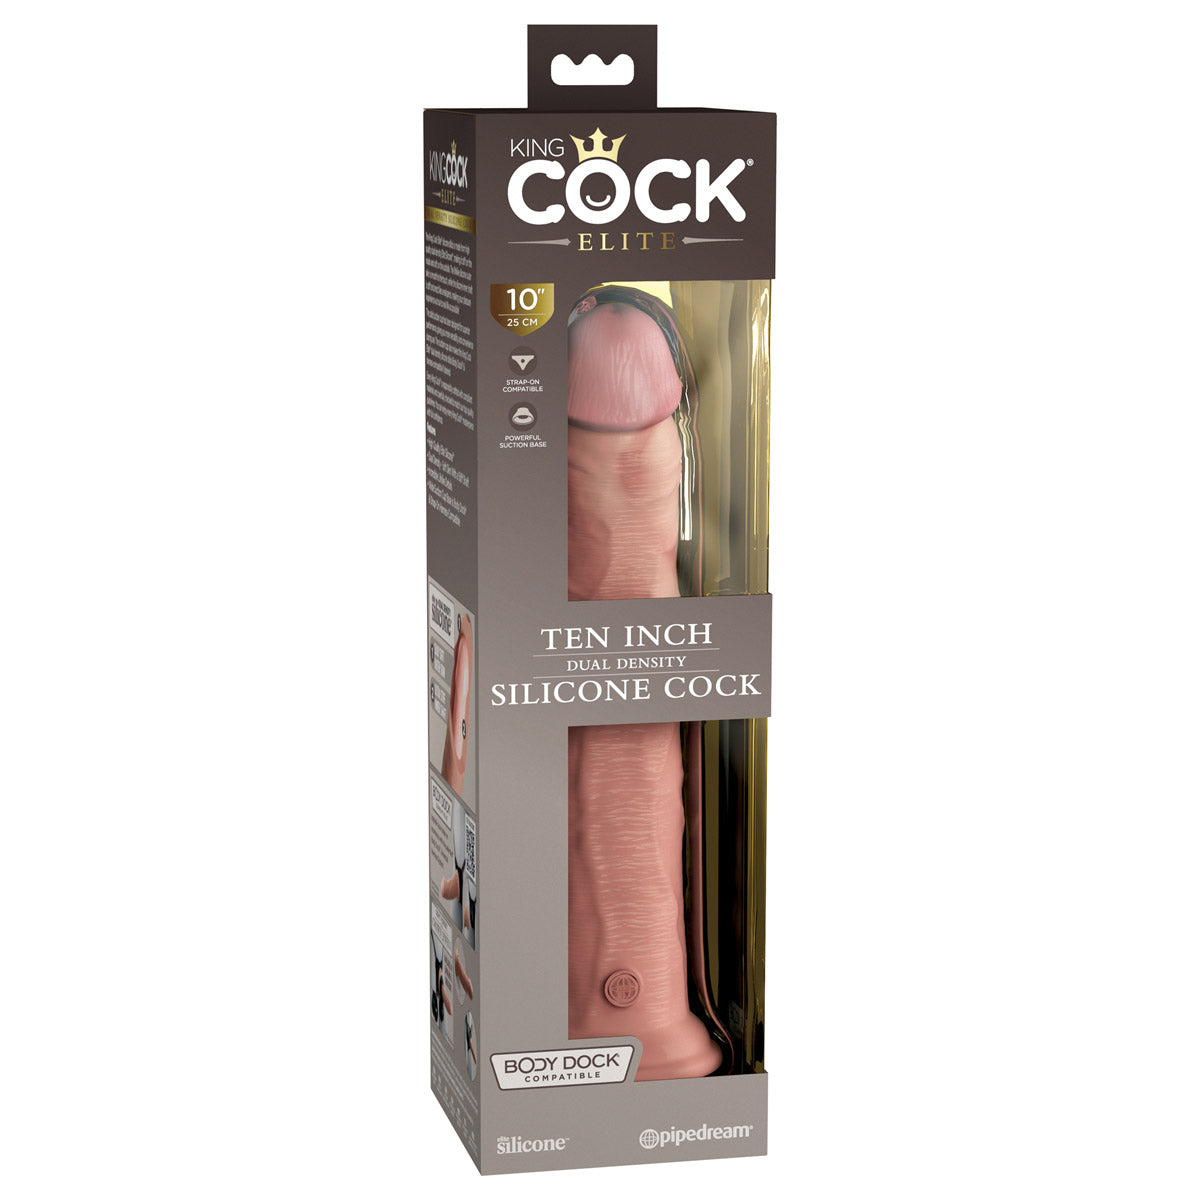 King Cock Elite 10" Silicone Dual Density Cock - Light - Thorn & Feather Sex Toy Canada